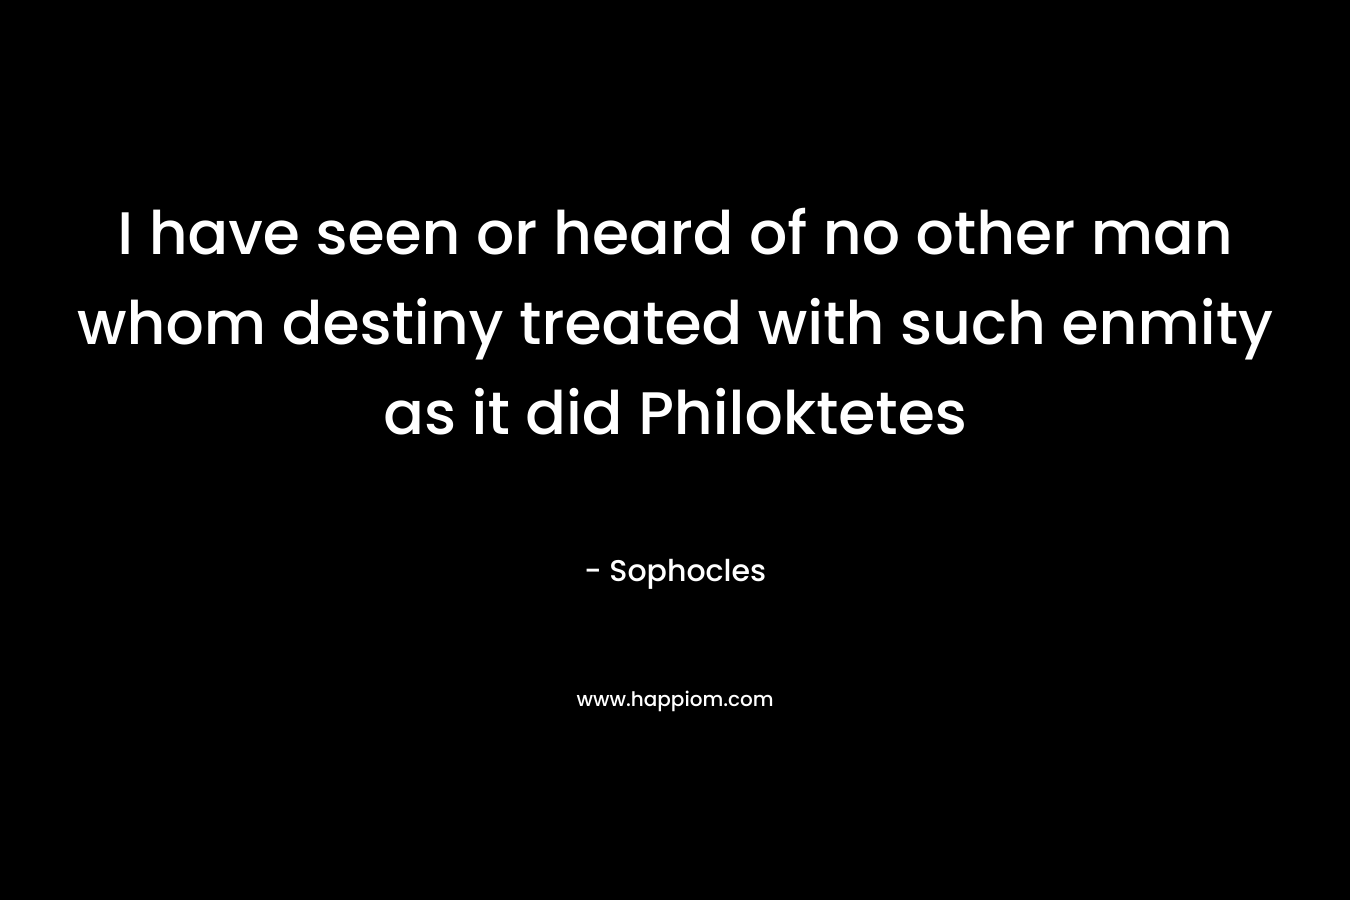 I have seen or heard of no other man whom destiny treated with such enmity as it did Philoktetes